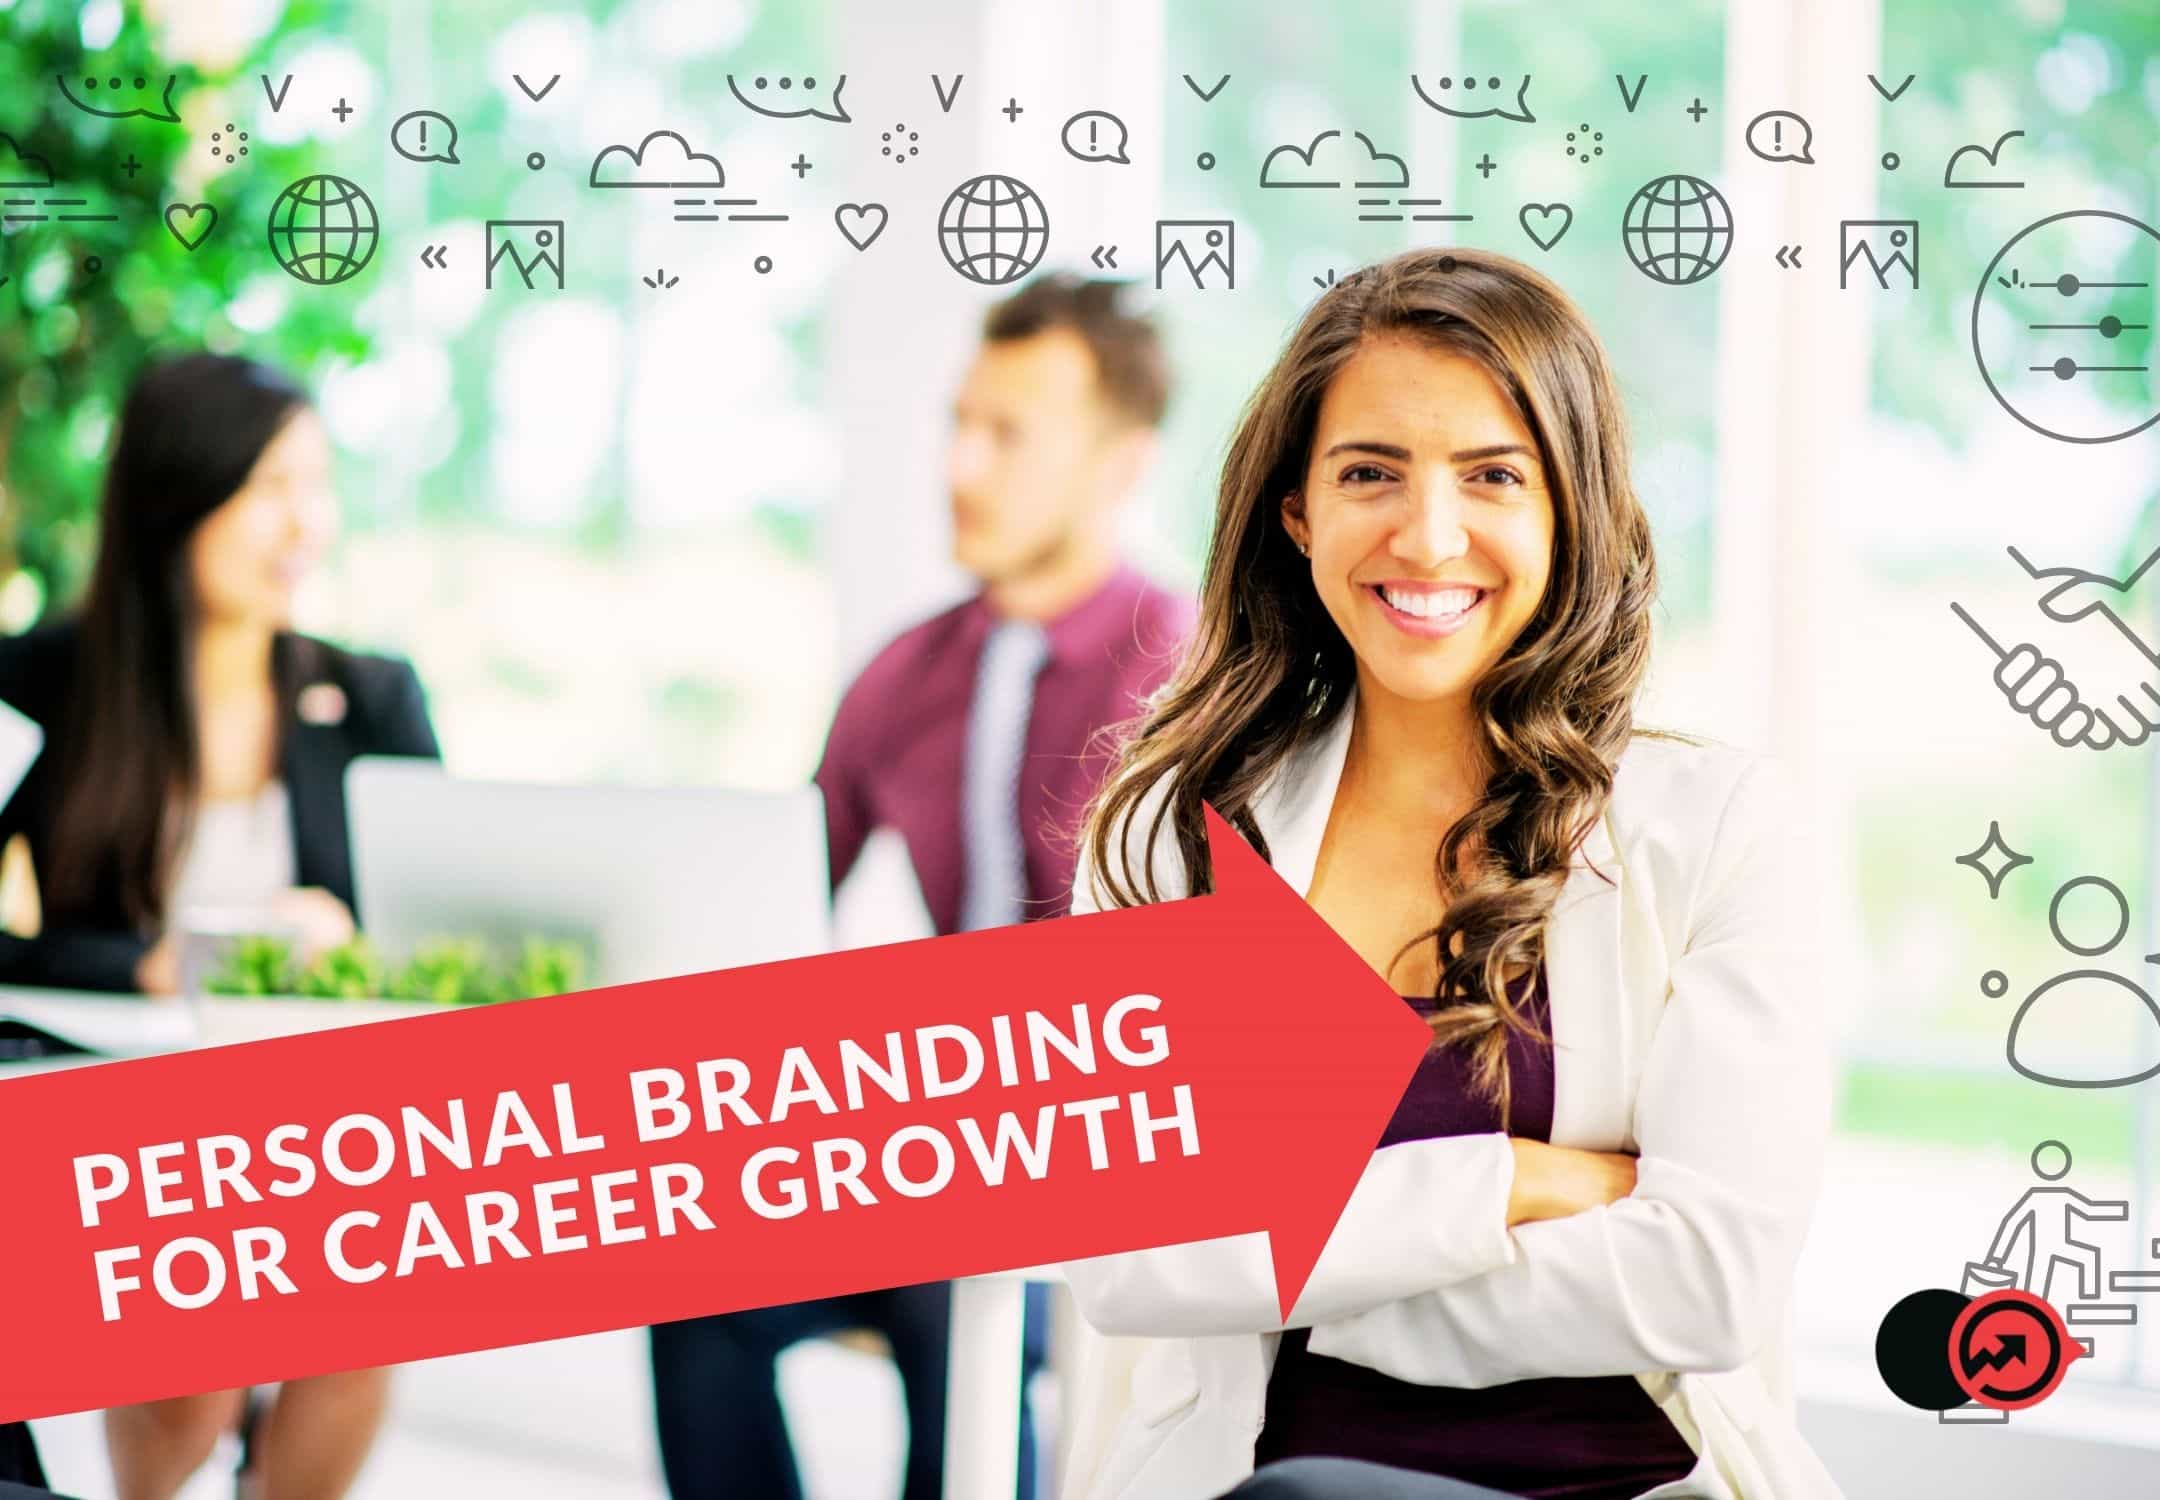 Personal Branding for career growth promotional Image.